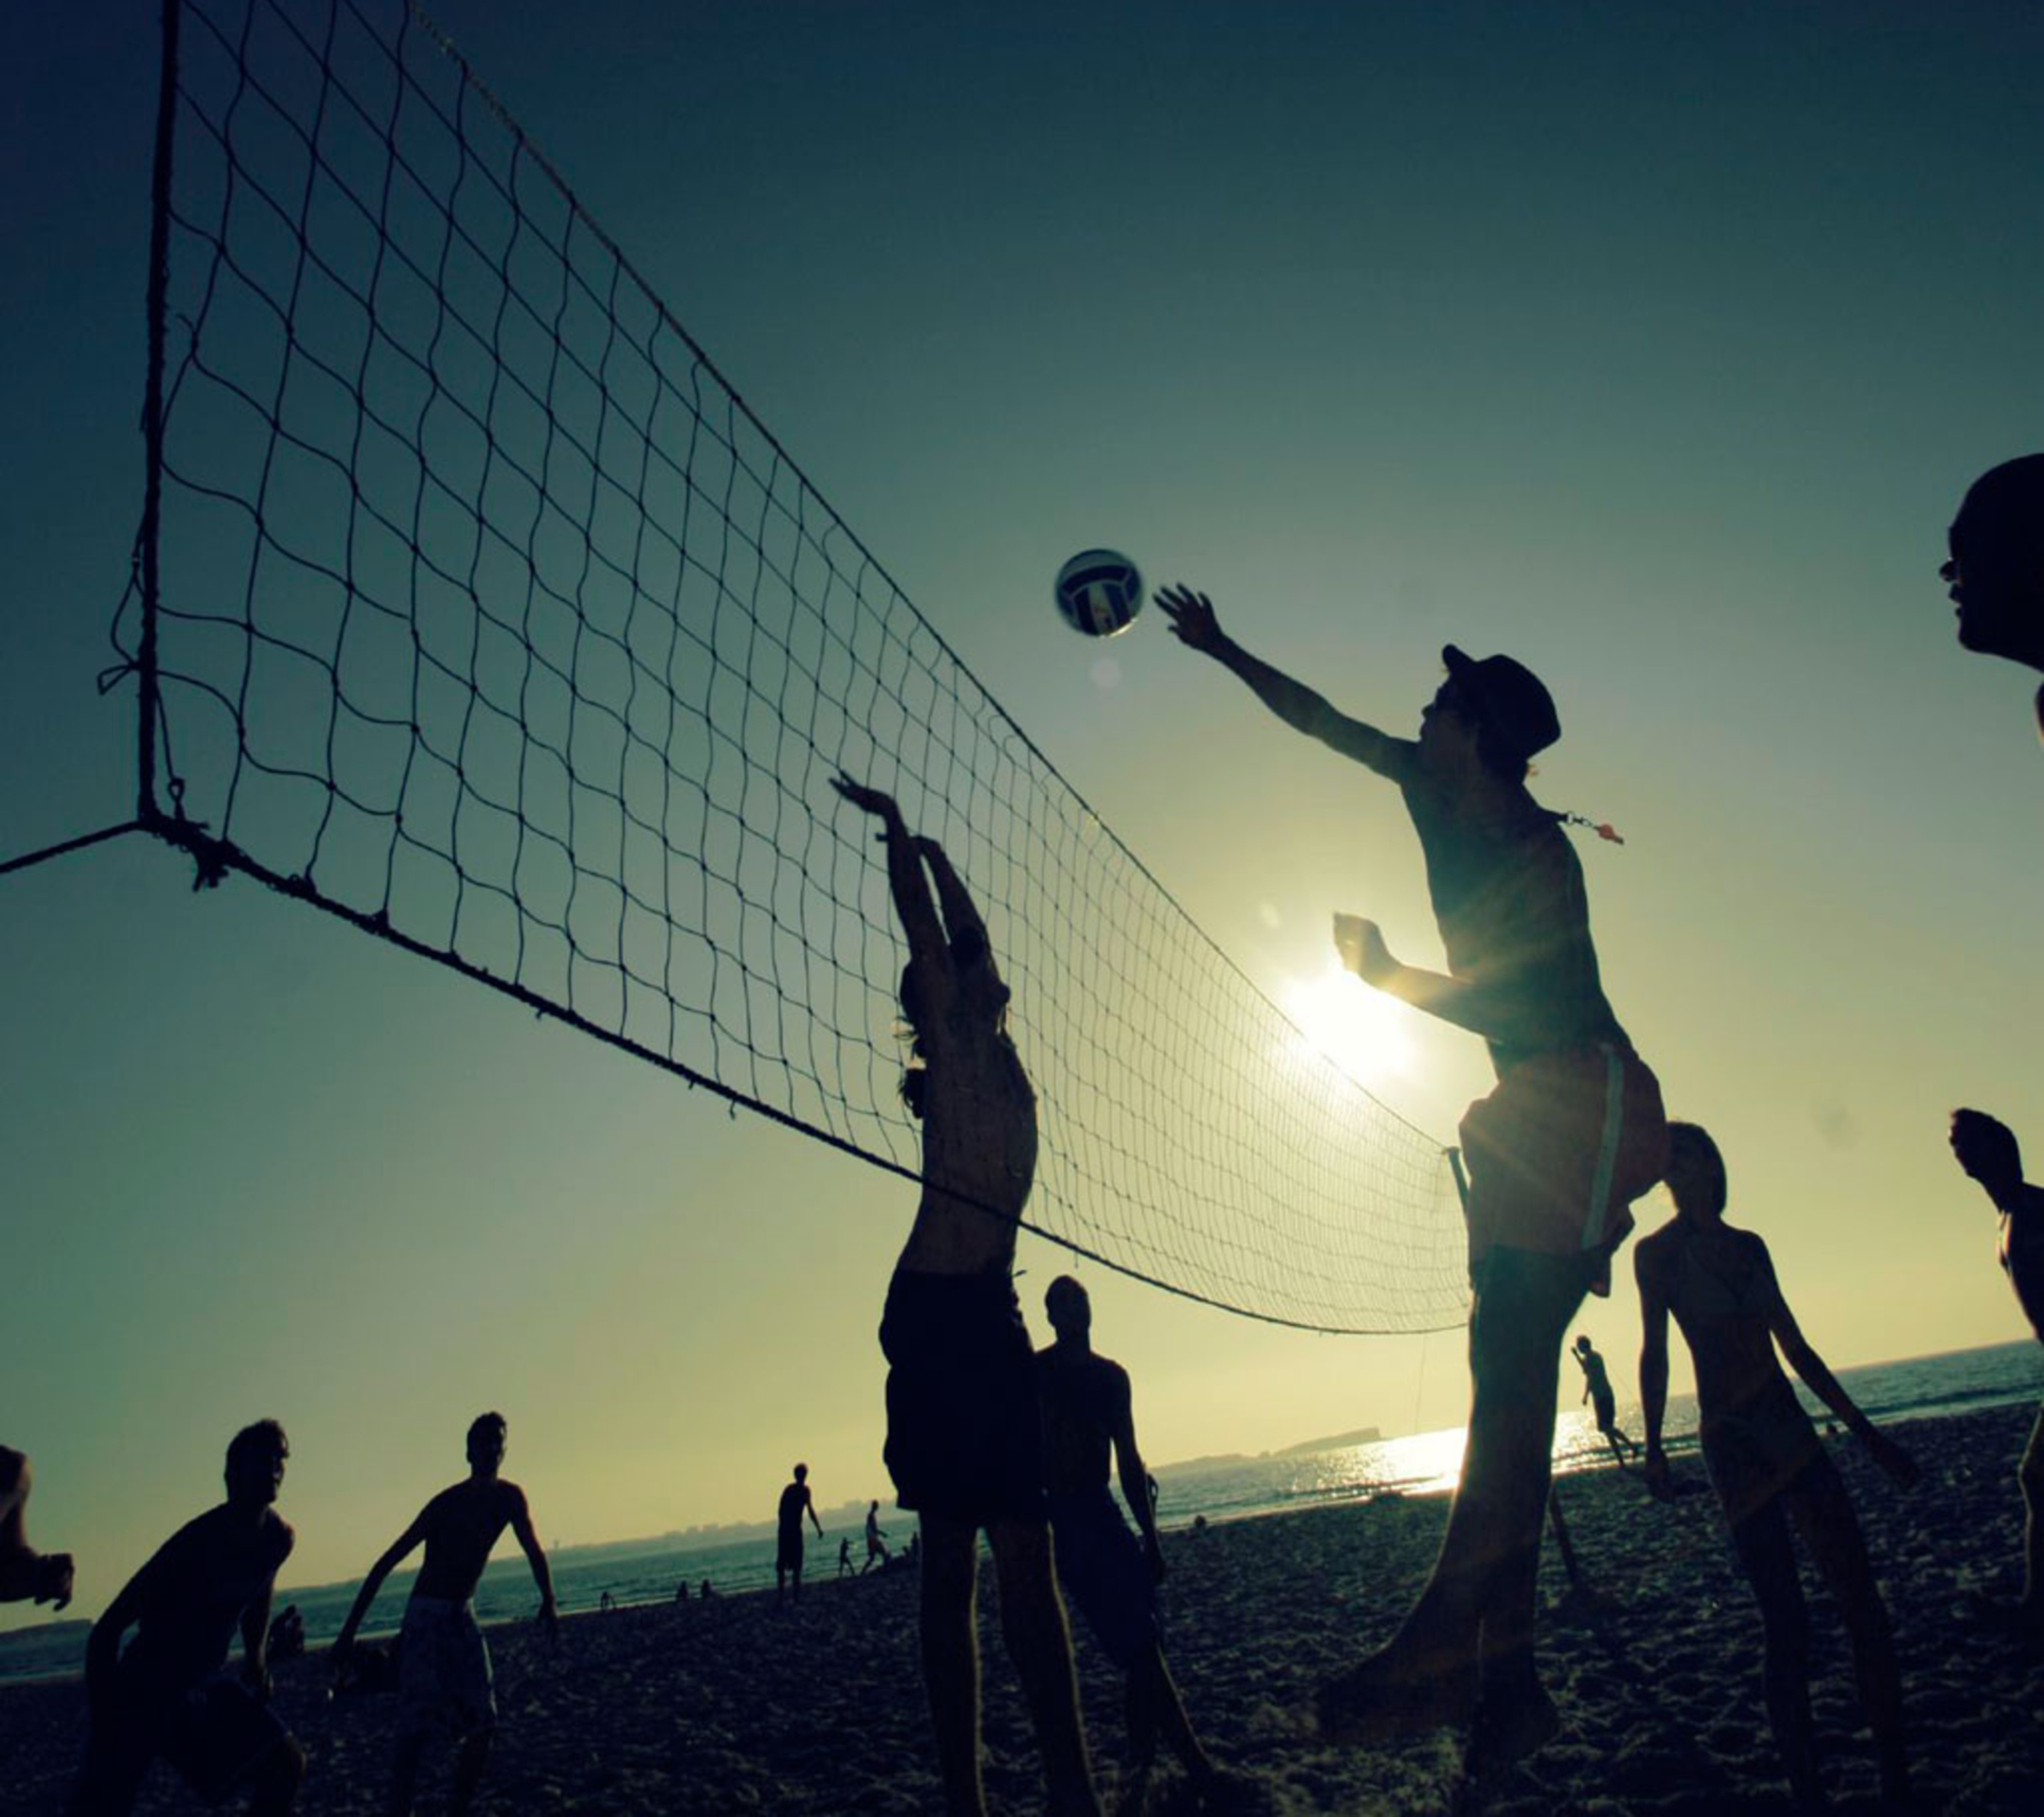 tumblr volleyball backgrounds > Backgrounds For Gallery Tumblr Volleyball